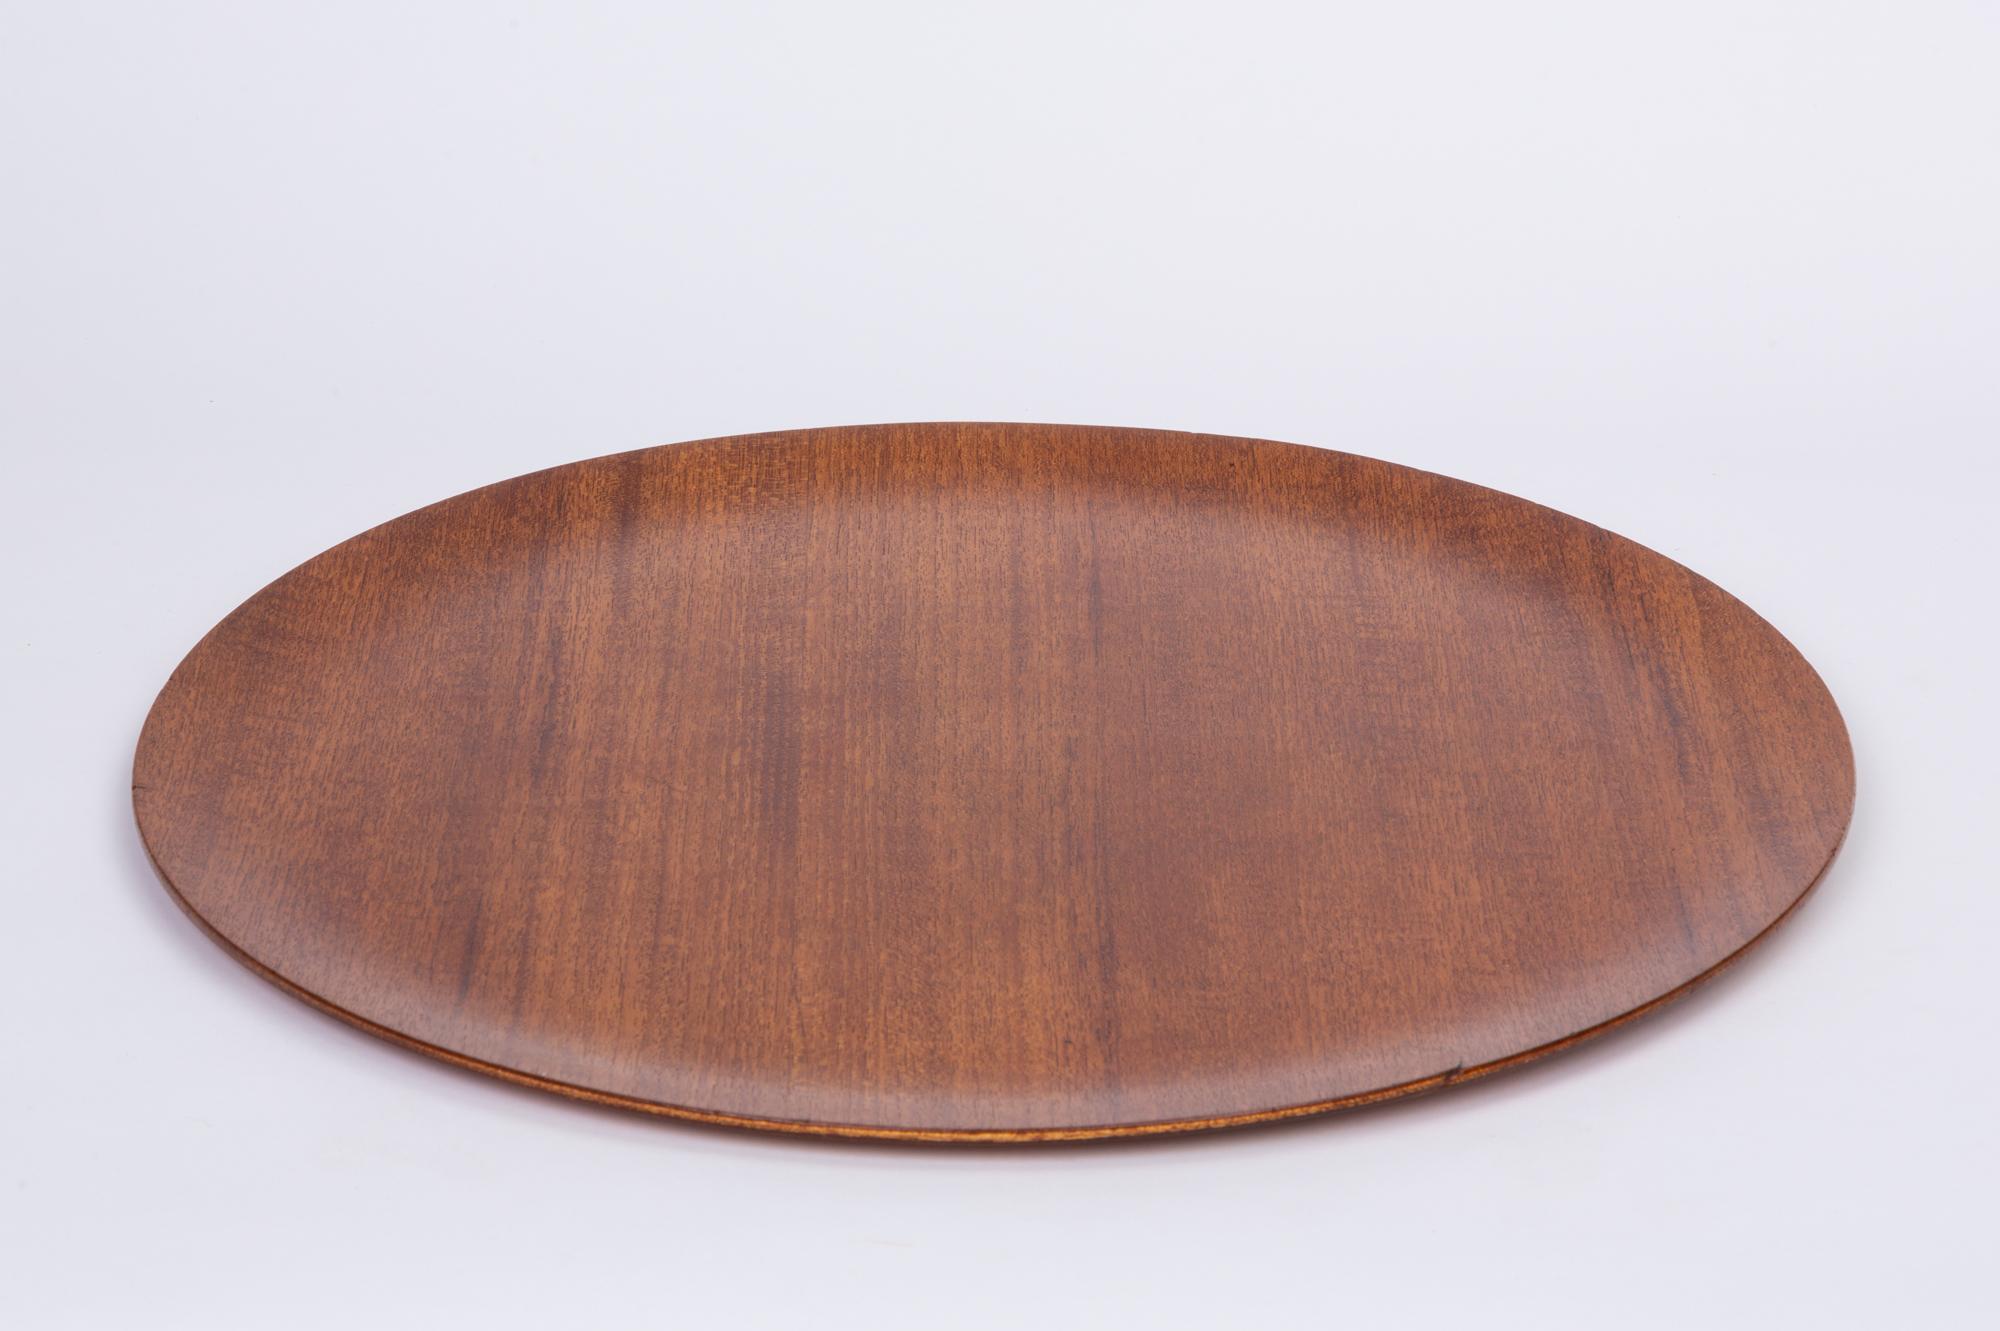 Round teak serving tray in the style of Jens Quistgaard. The tray features a flat edge and beautiful grain that is more apparent with the hand applied oil finish.

Dimensions: 18” diameter x .5” height

Condition: Excellent vintage condition;